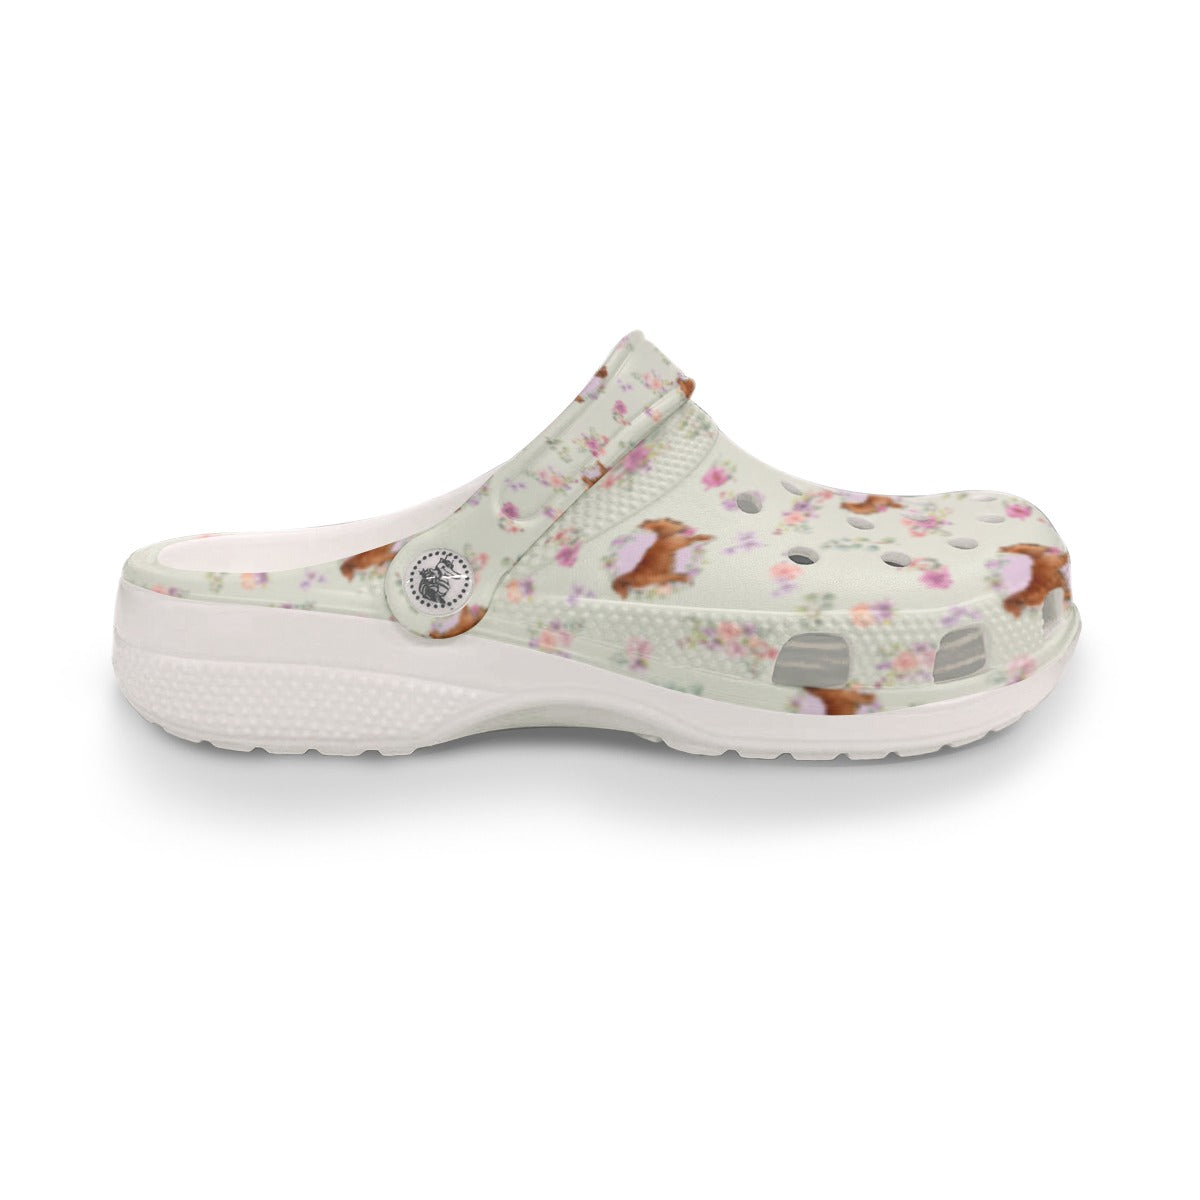 All-Over Print Women's Classic Clogs